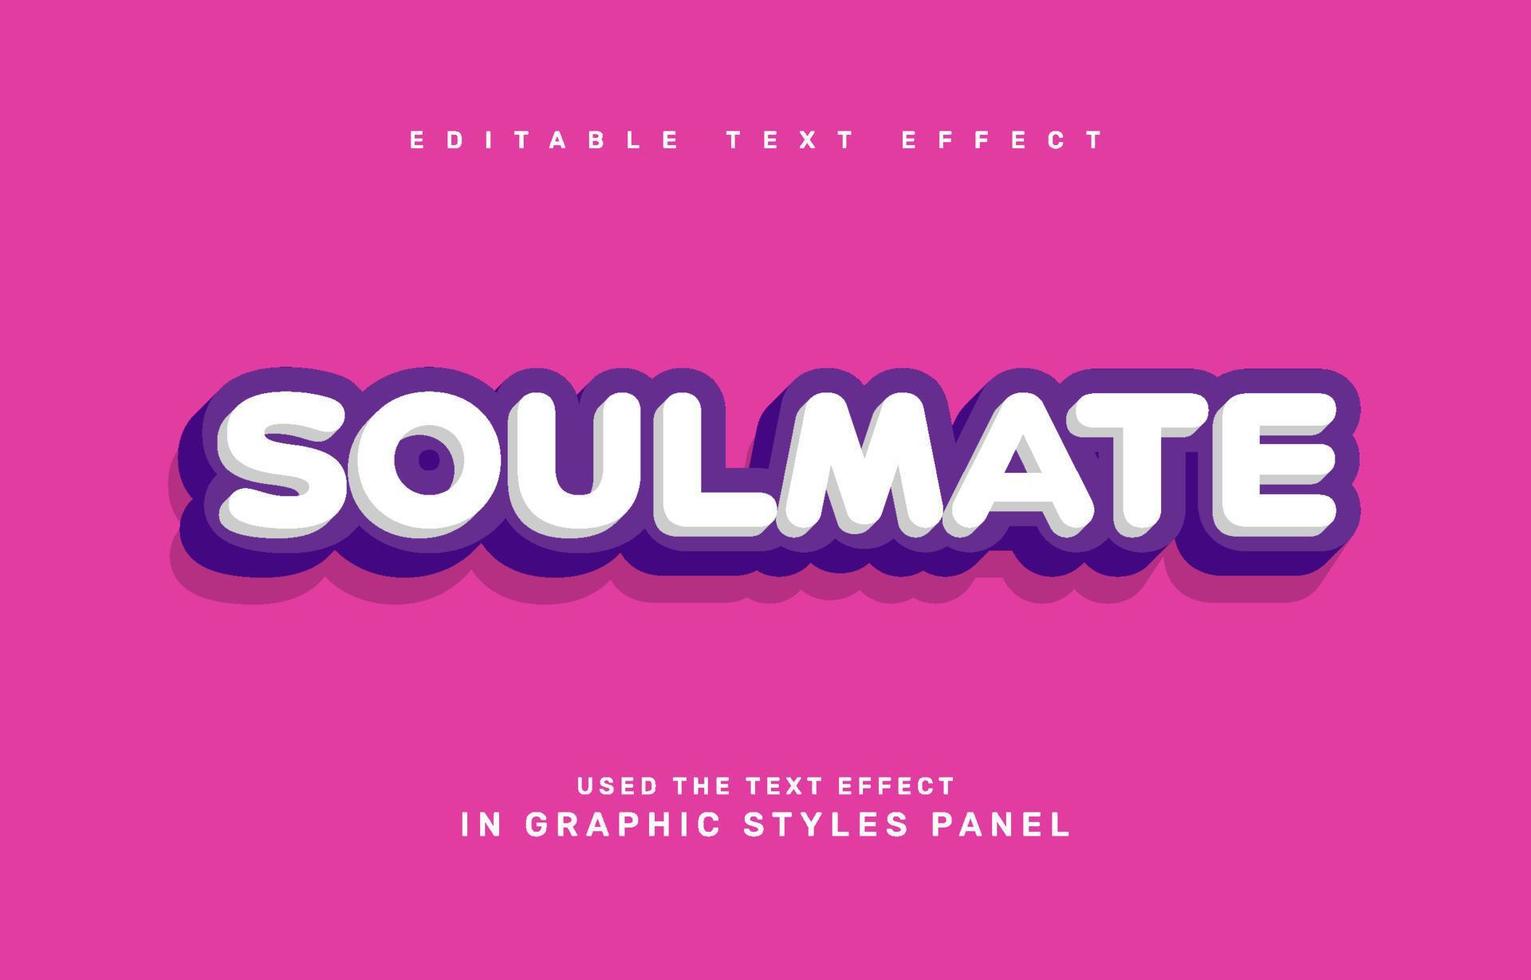 Soulmate editable text effect template vector